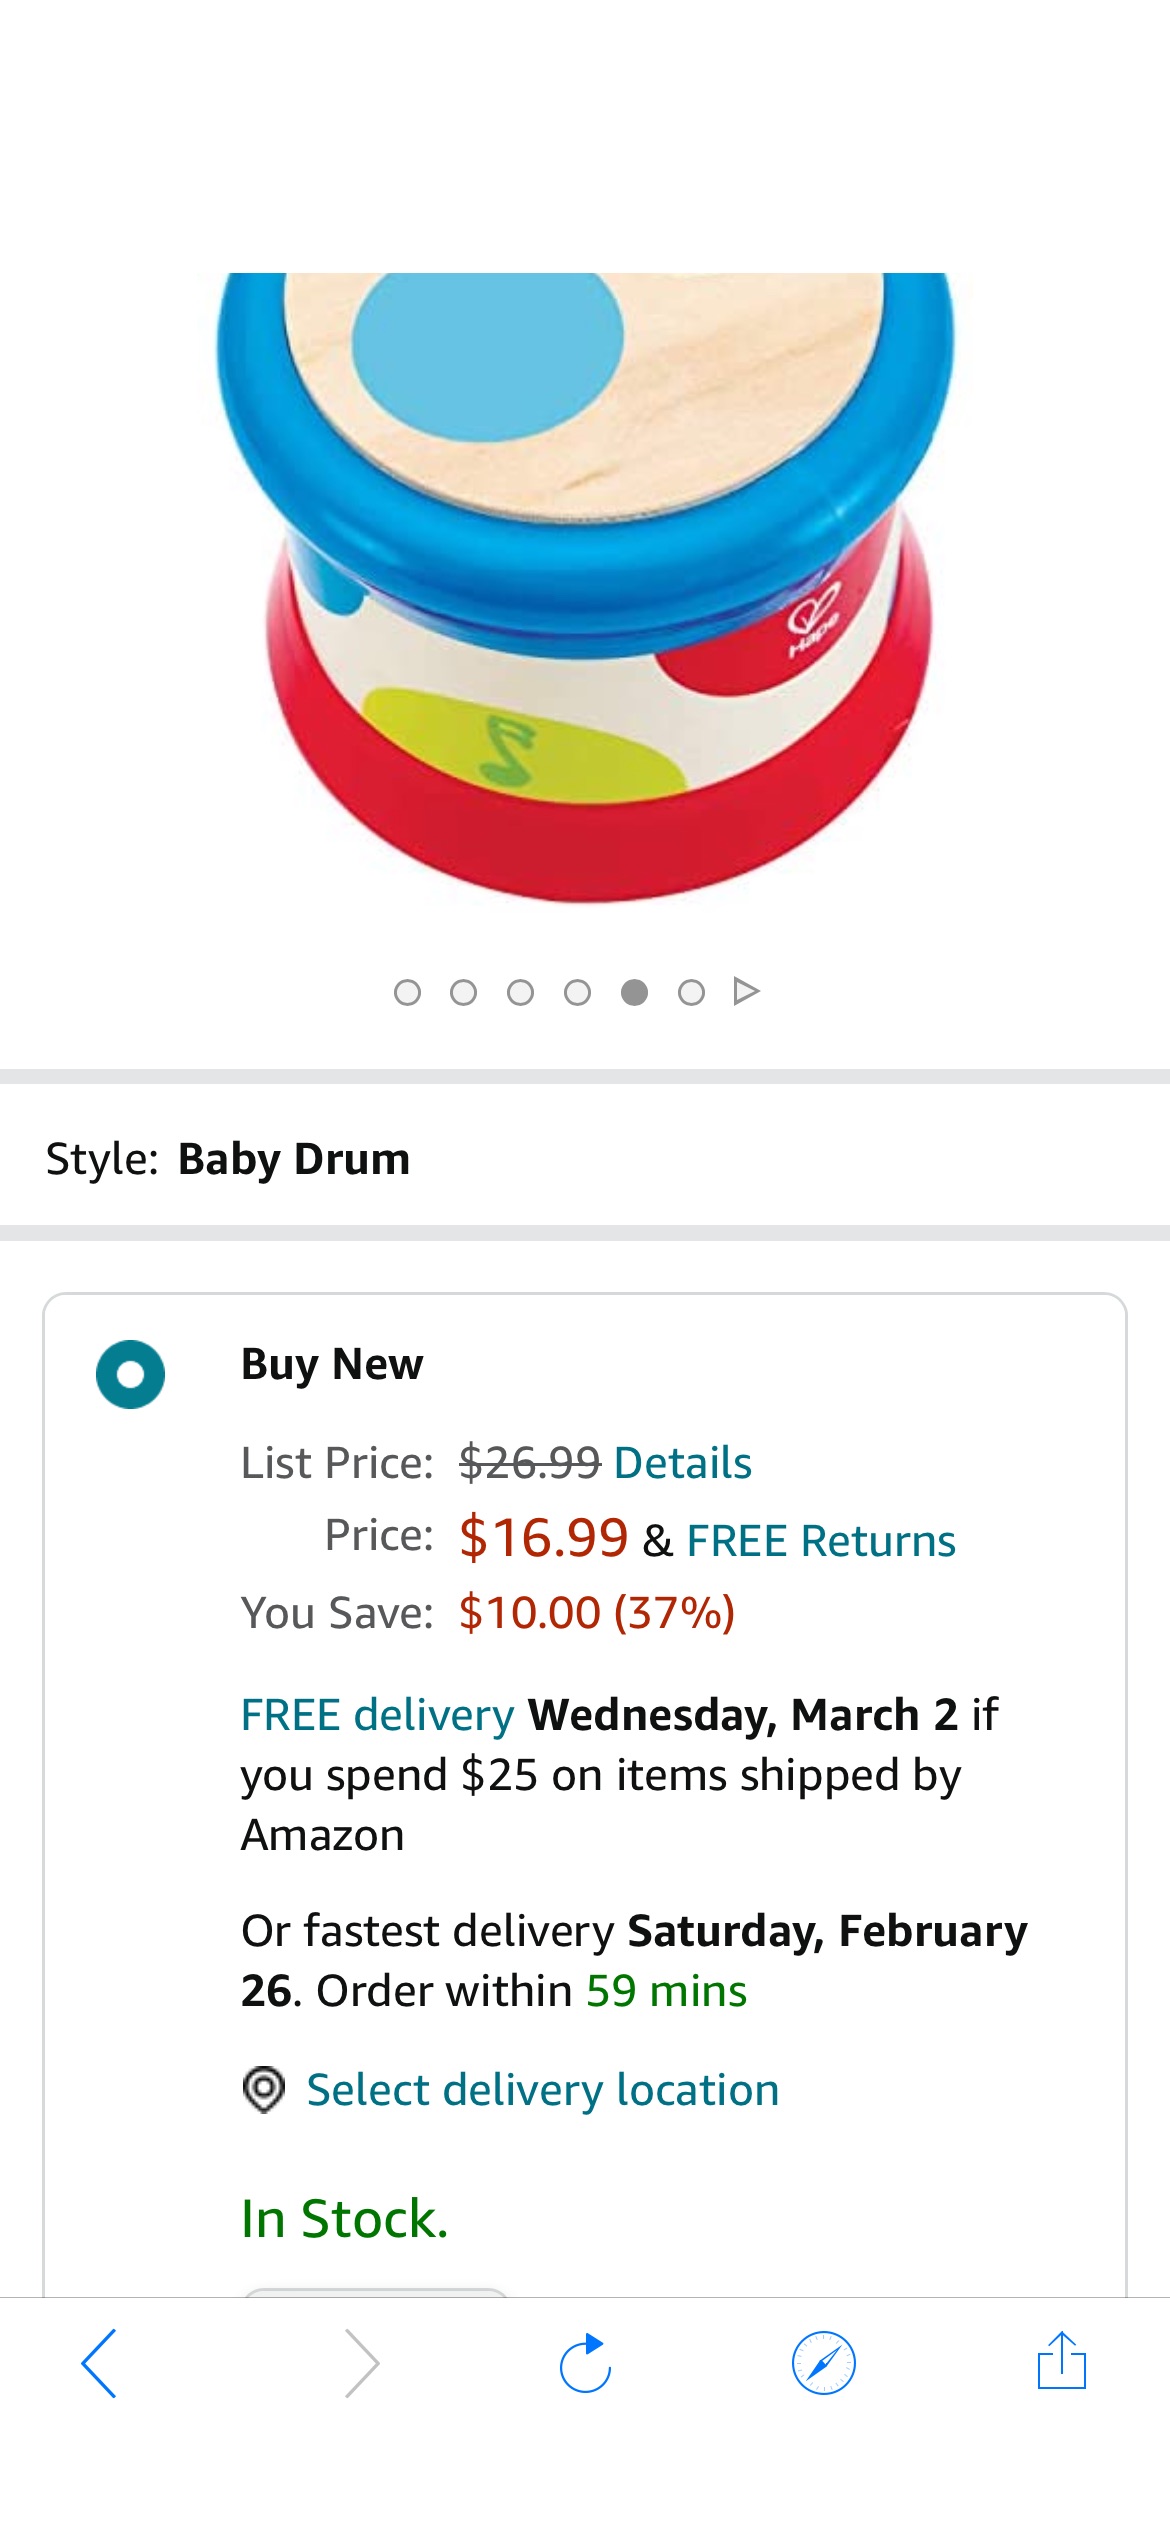 Amazon.com: Hape Baby Drum | Colorful Rolling Drum Musical Instrument Toy For Toddlers, Rhythm & Sound Learning, Battery Powered (E0333), hape音乐小鼓